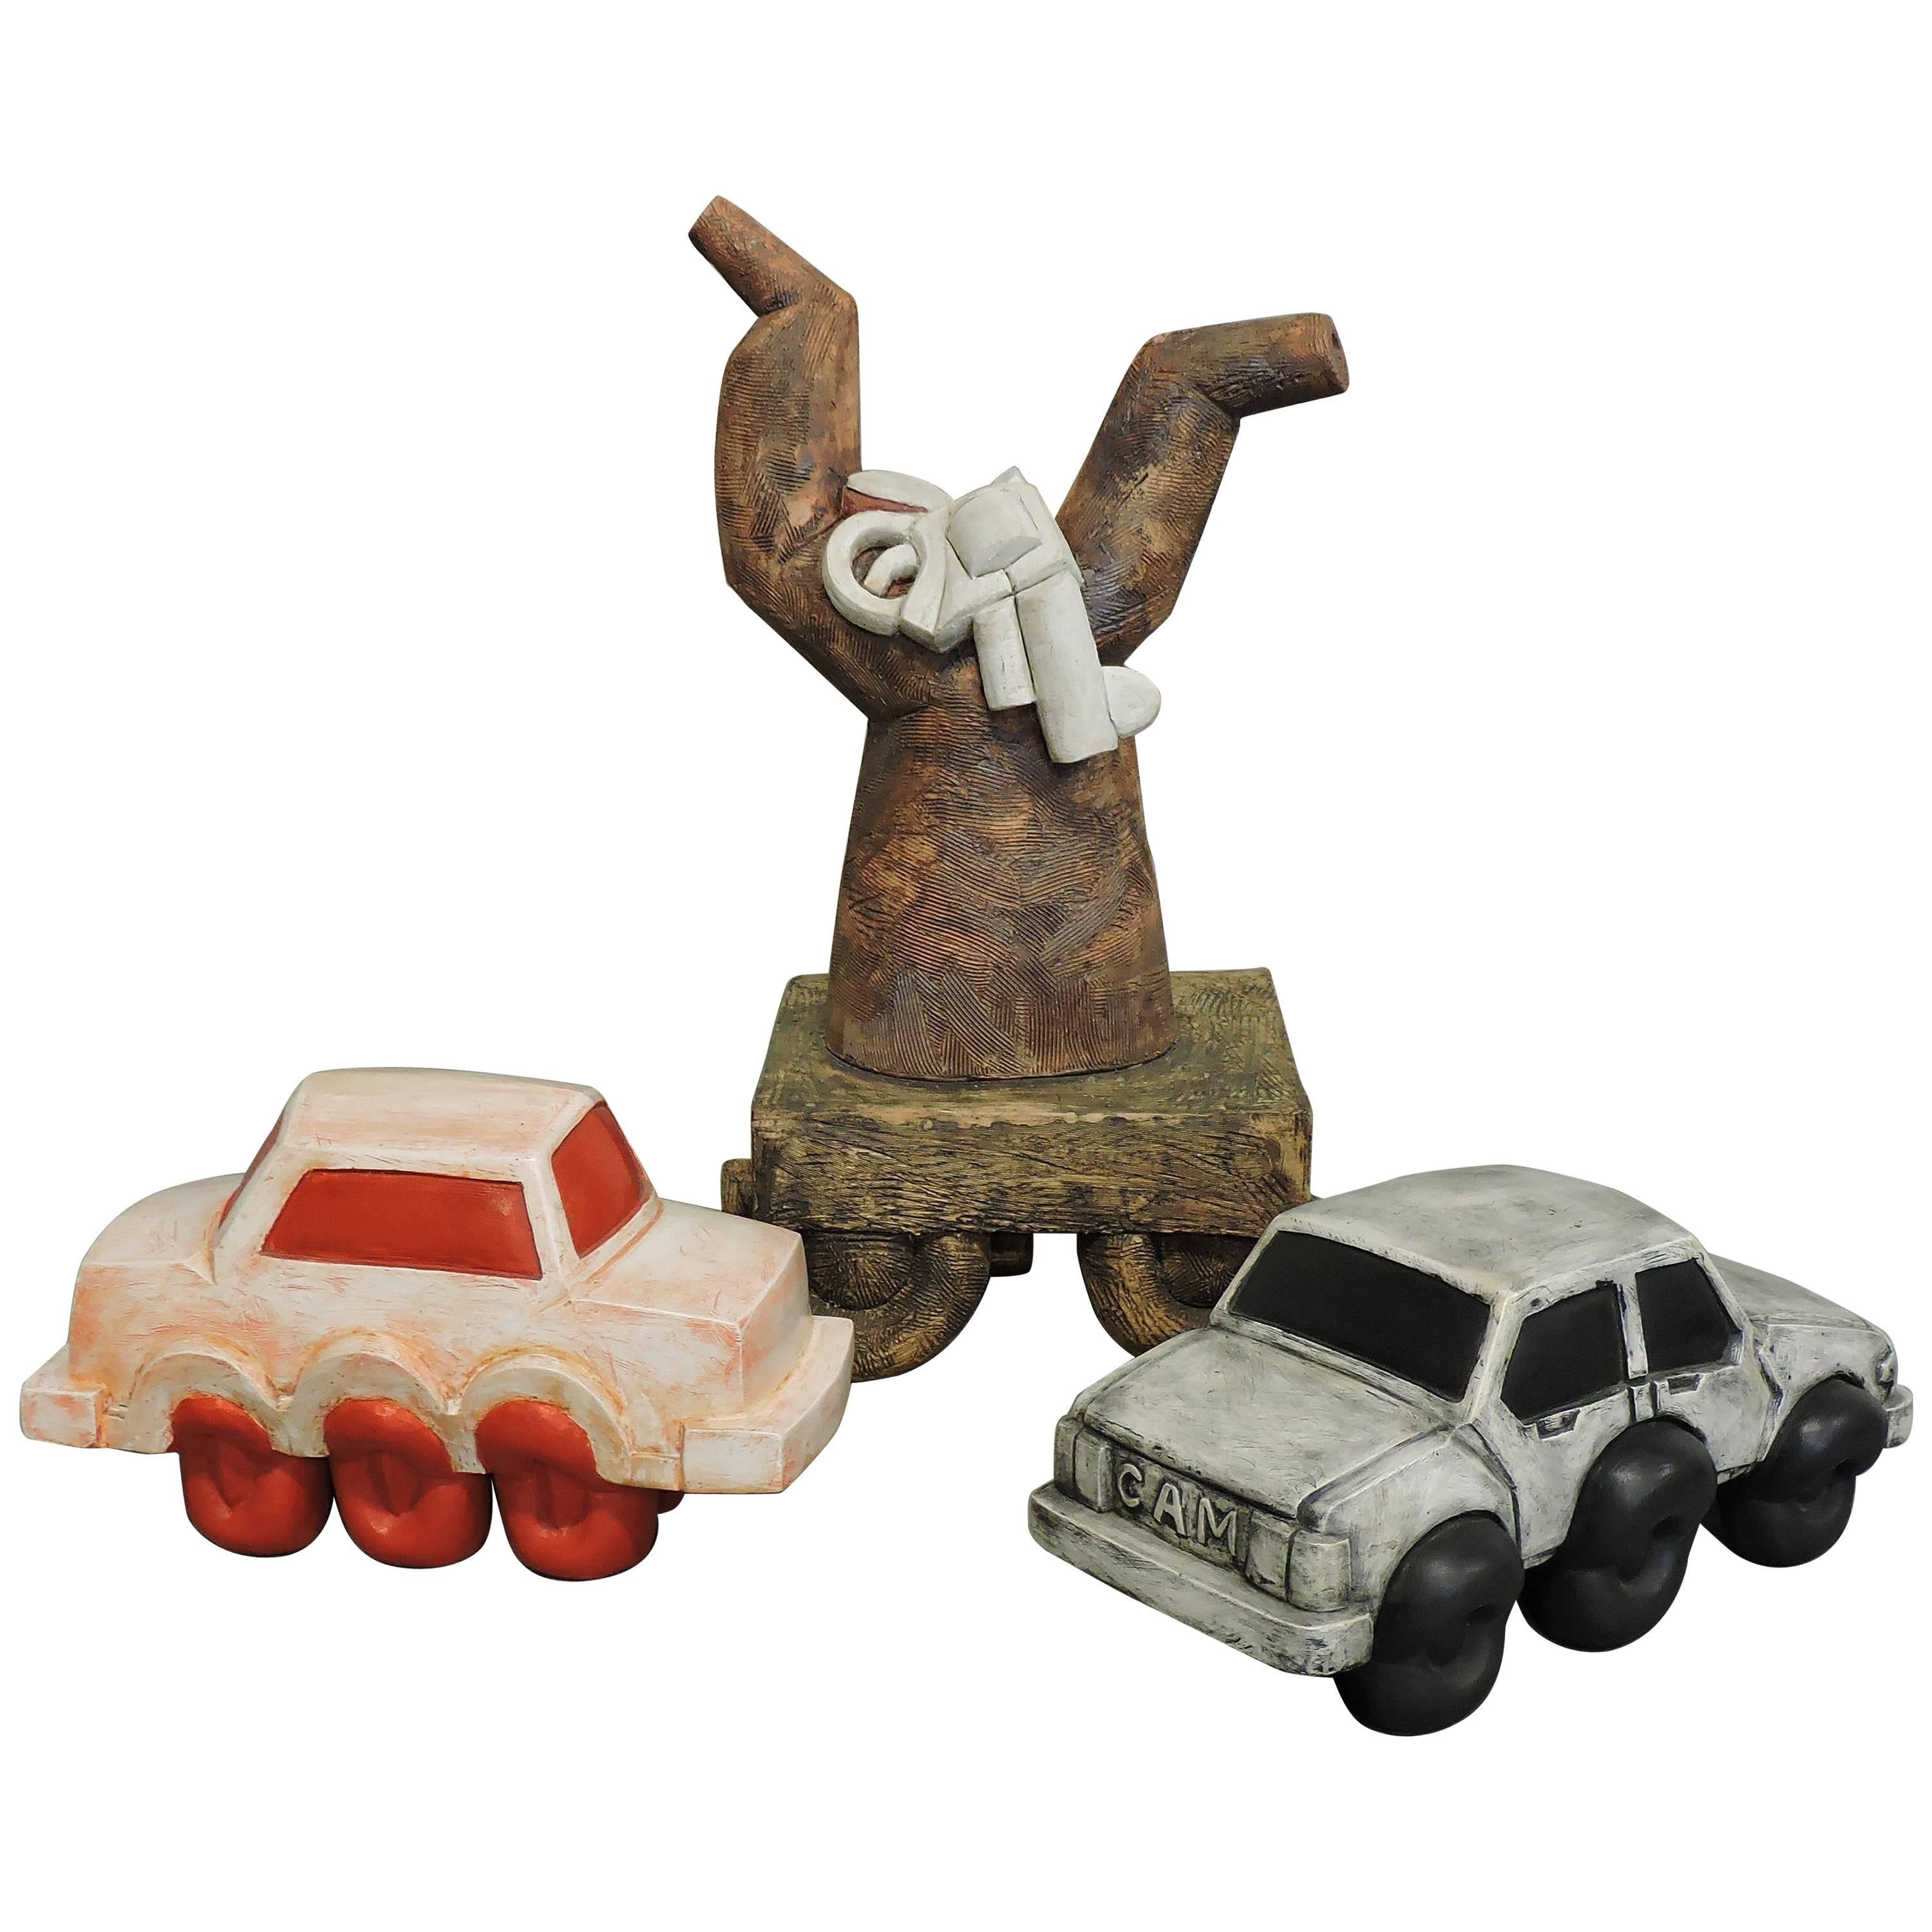 Whimsical Modern Ceramic and Plaster Sculptures by Scott Rosenthal For Sale